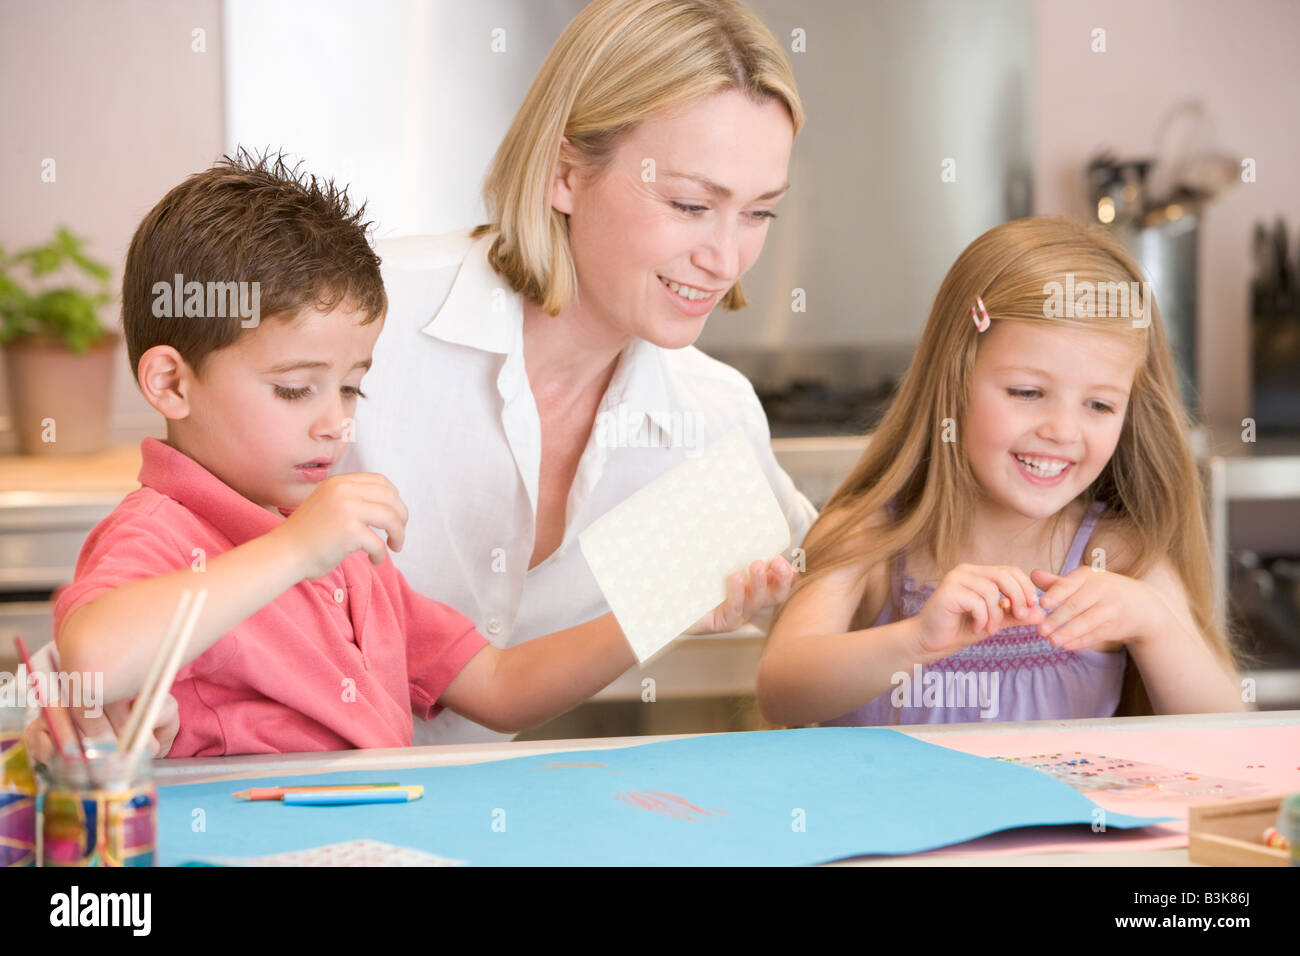 Woman and two young children in kitchen with art project smiling Stock Photo